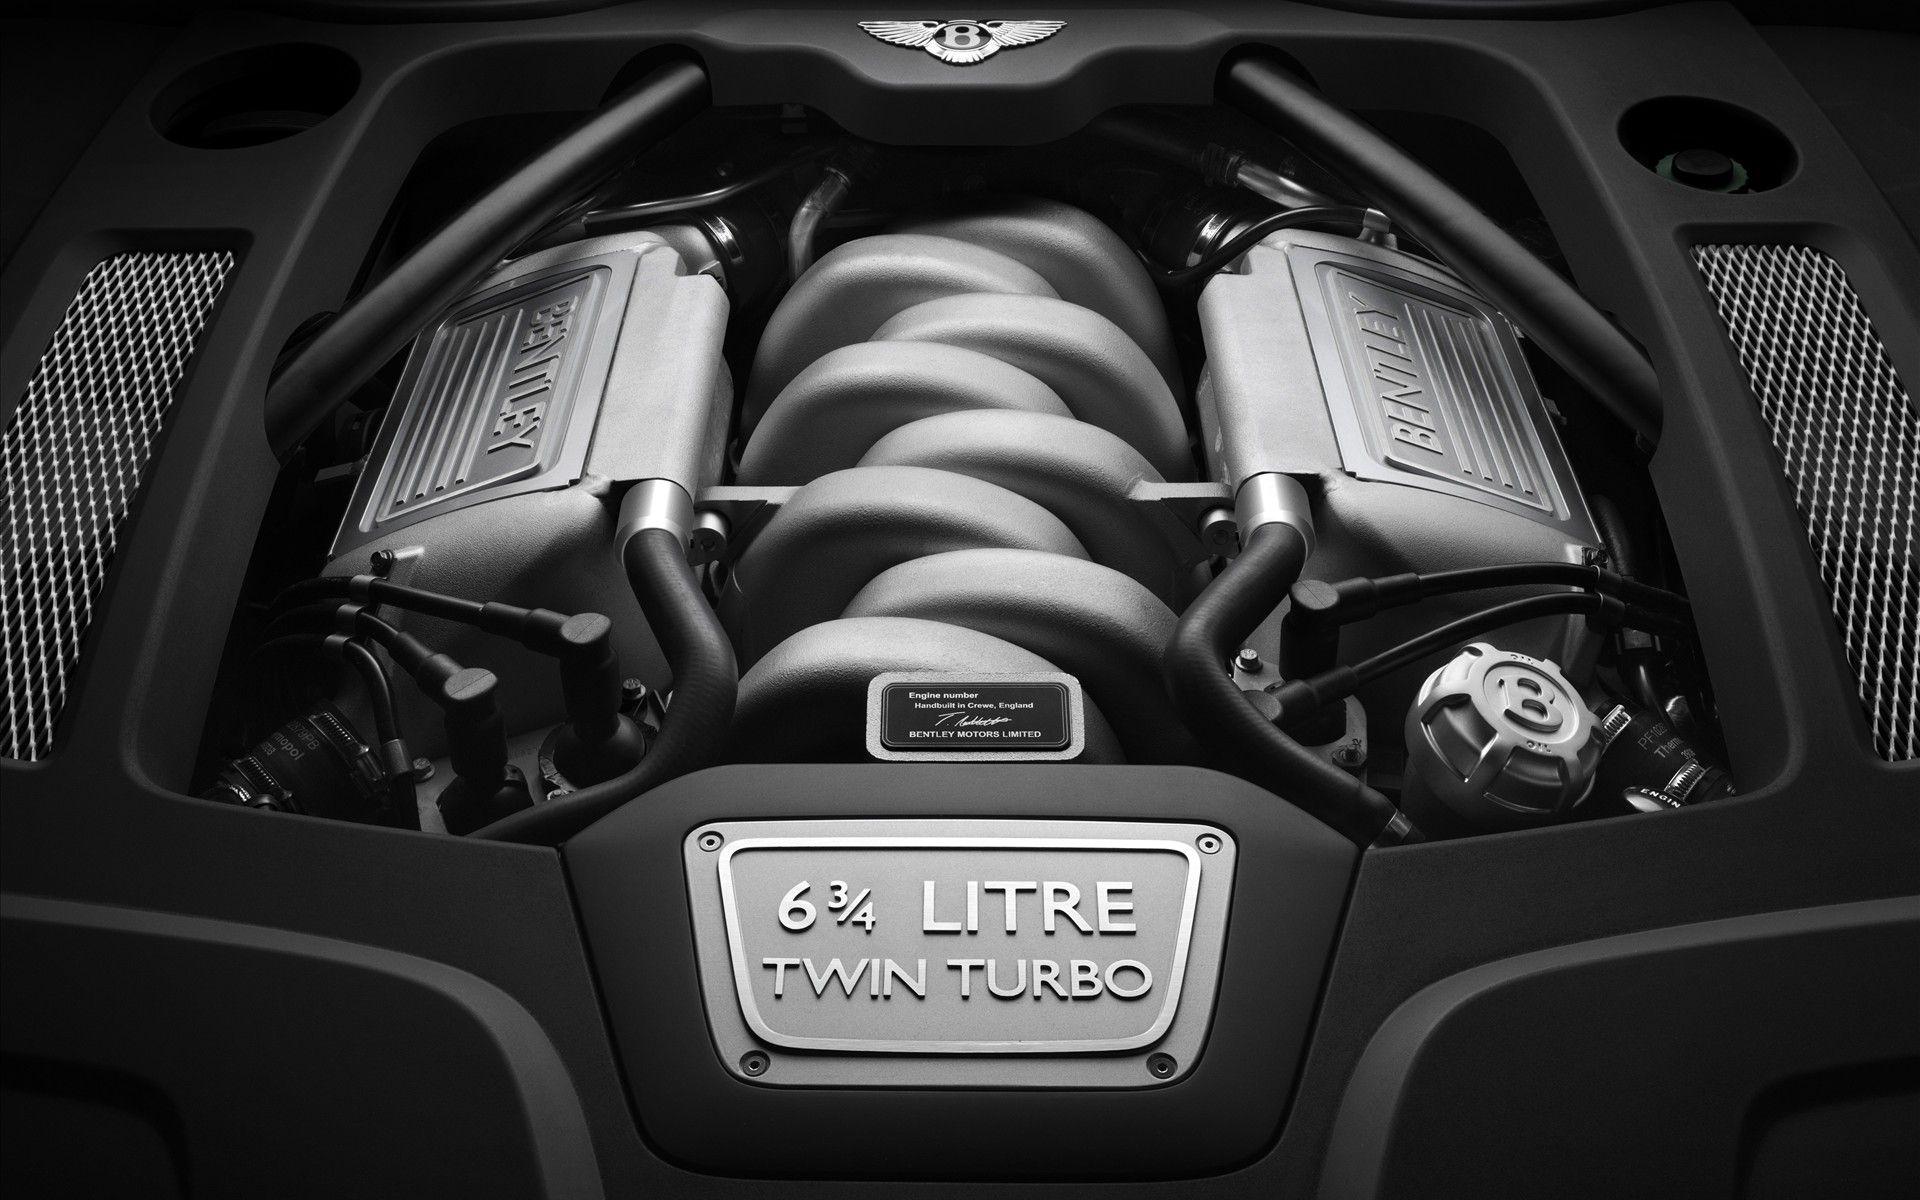 Free Download HQ Engine 6 3 4 Litre Twin Turbo Bentley Wallpaper